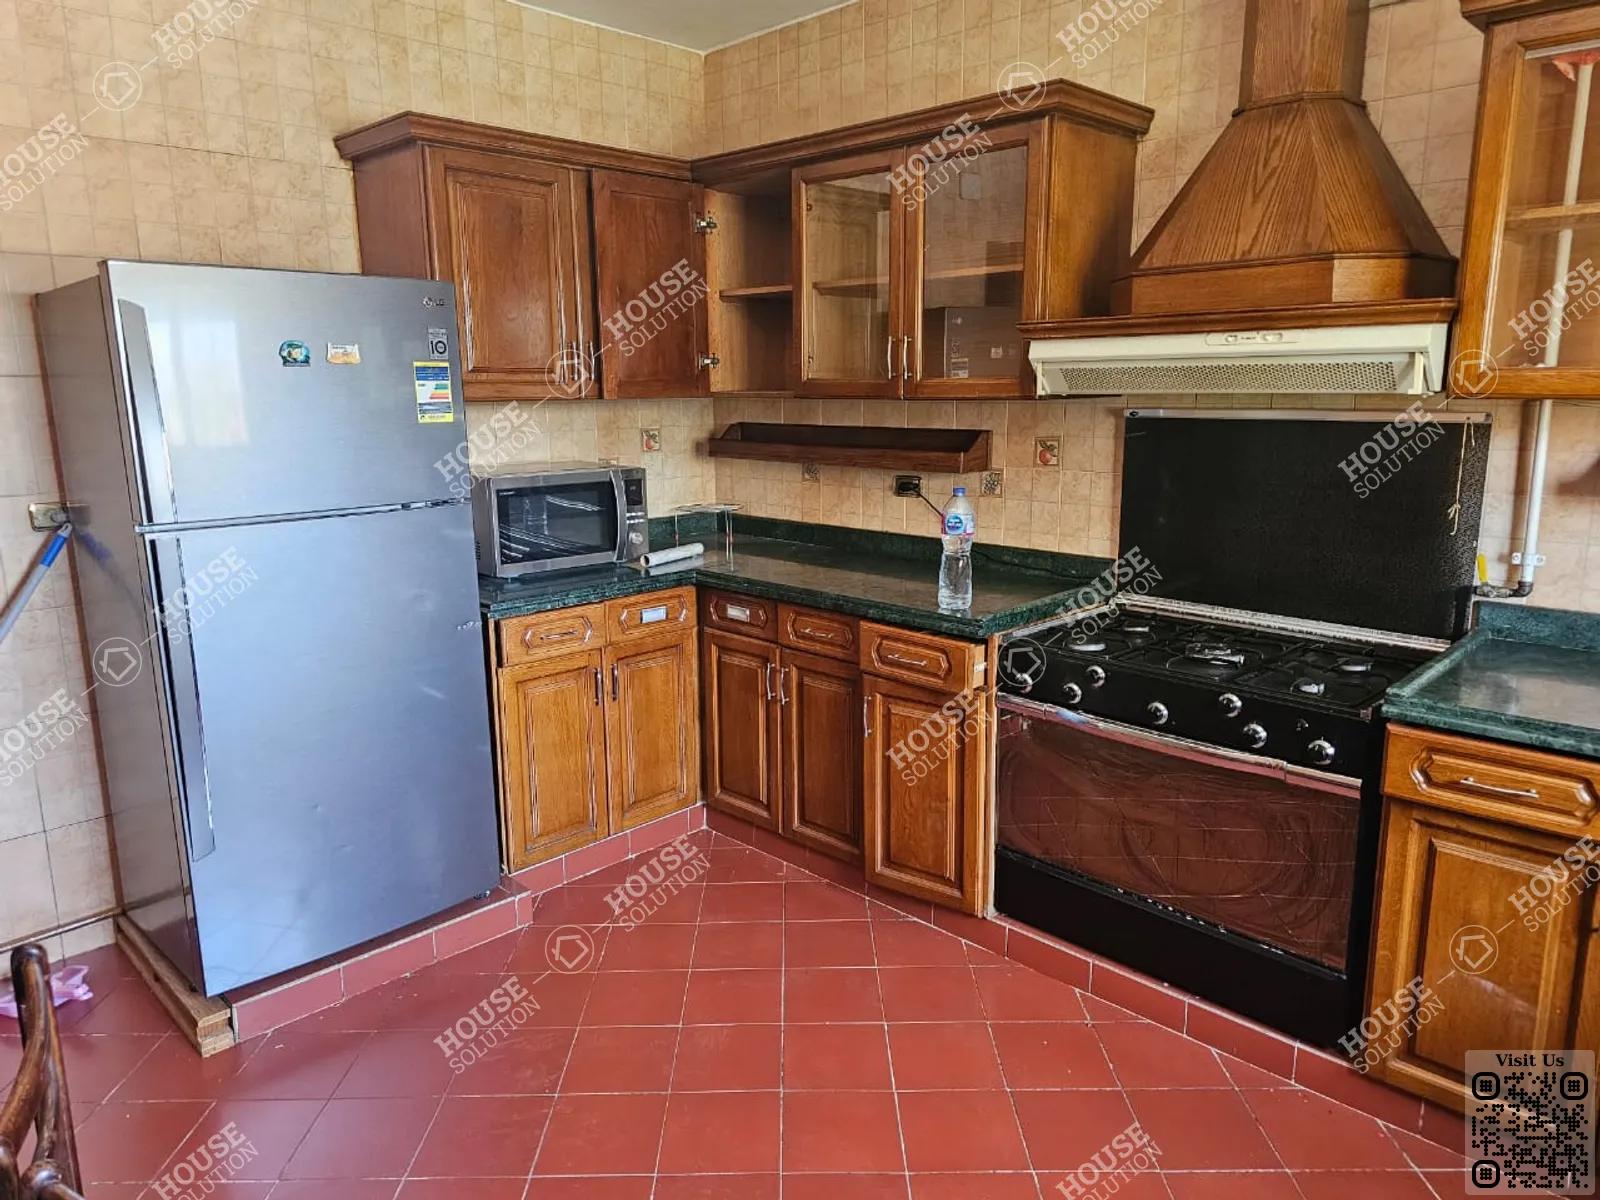 KITCHEN  @ Apartments For Rent In Maadi Maadi Degla Area: 240 m² consists of 3 Bedrooms 3 Bathrooms Modern furnished 5 stars #4991-2